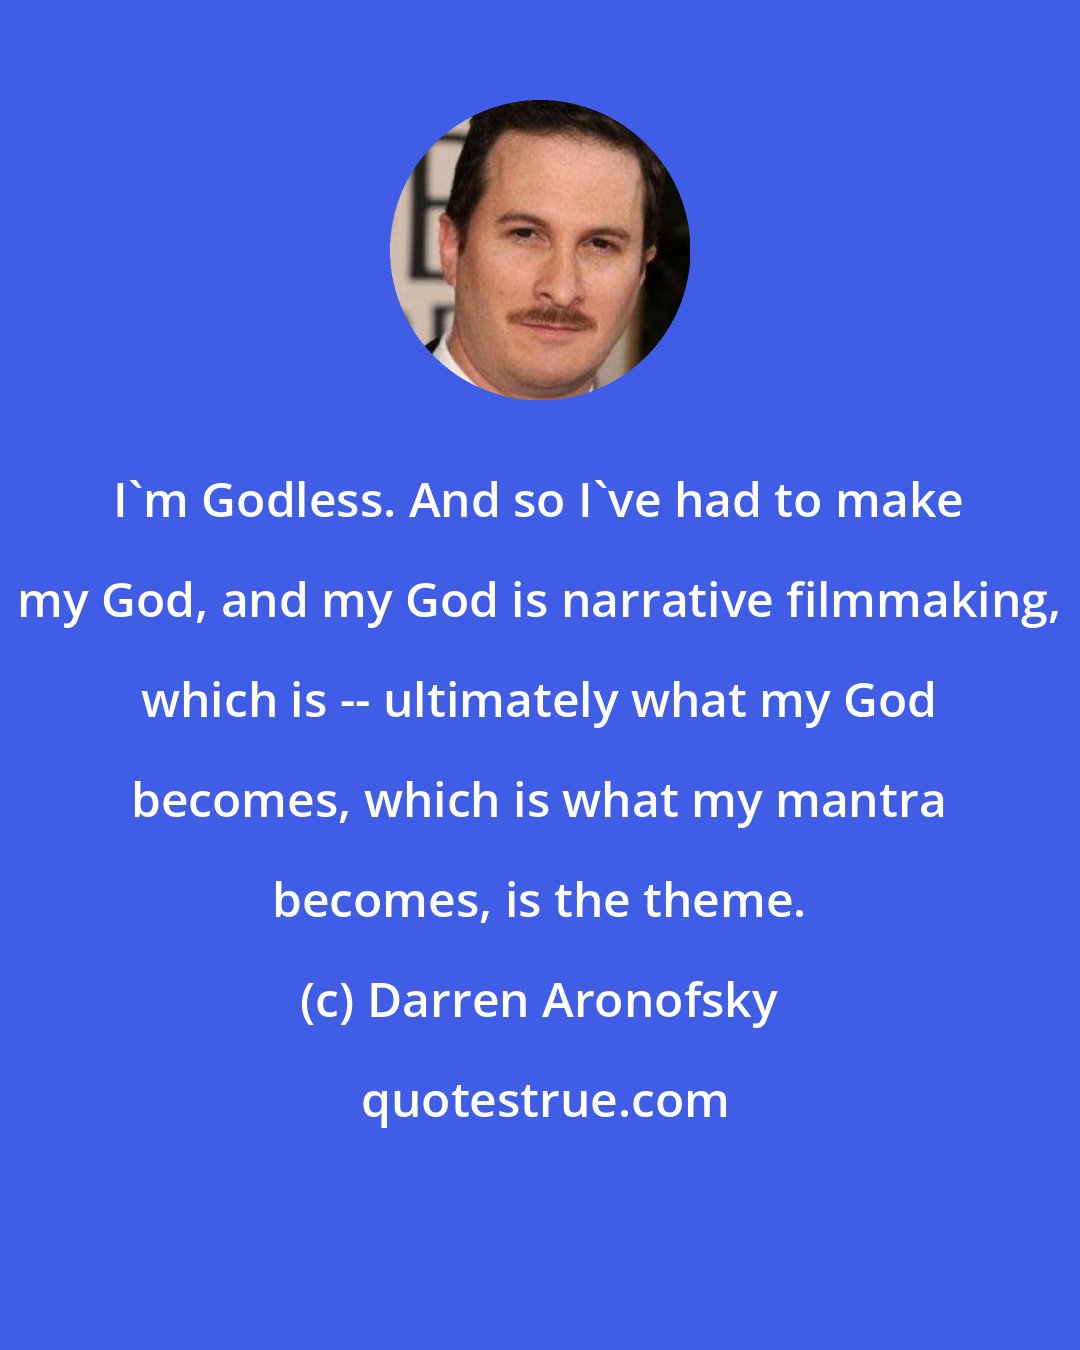 Darren Aronofsky: I'm Godless. And so I've had to make my God, and my God is narrative filmmaking, which is -- ultimately what my God becomes, which is what my mantra becomes, is the theme.